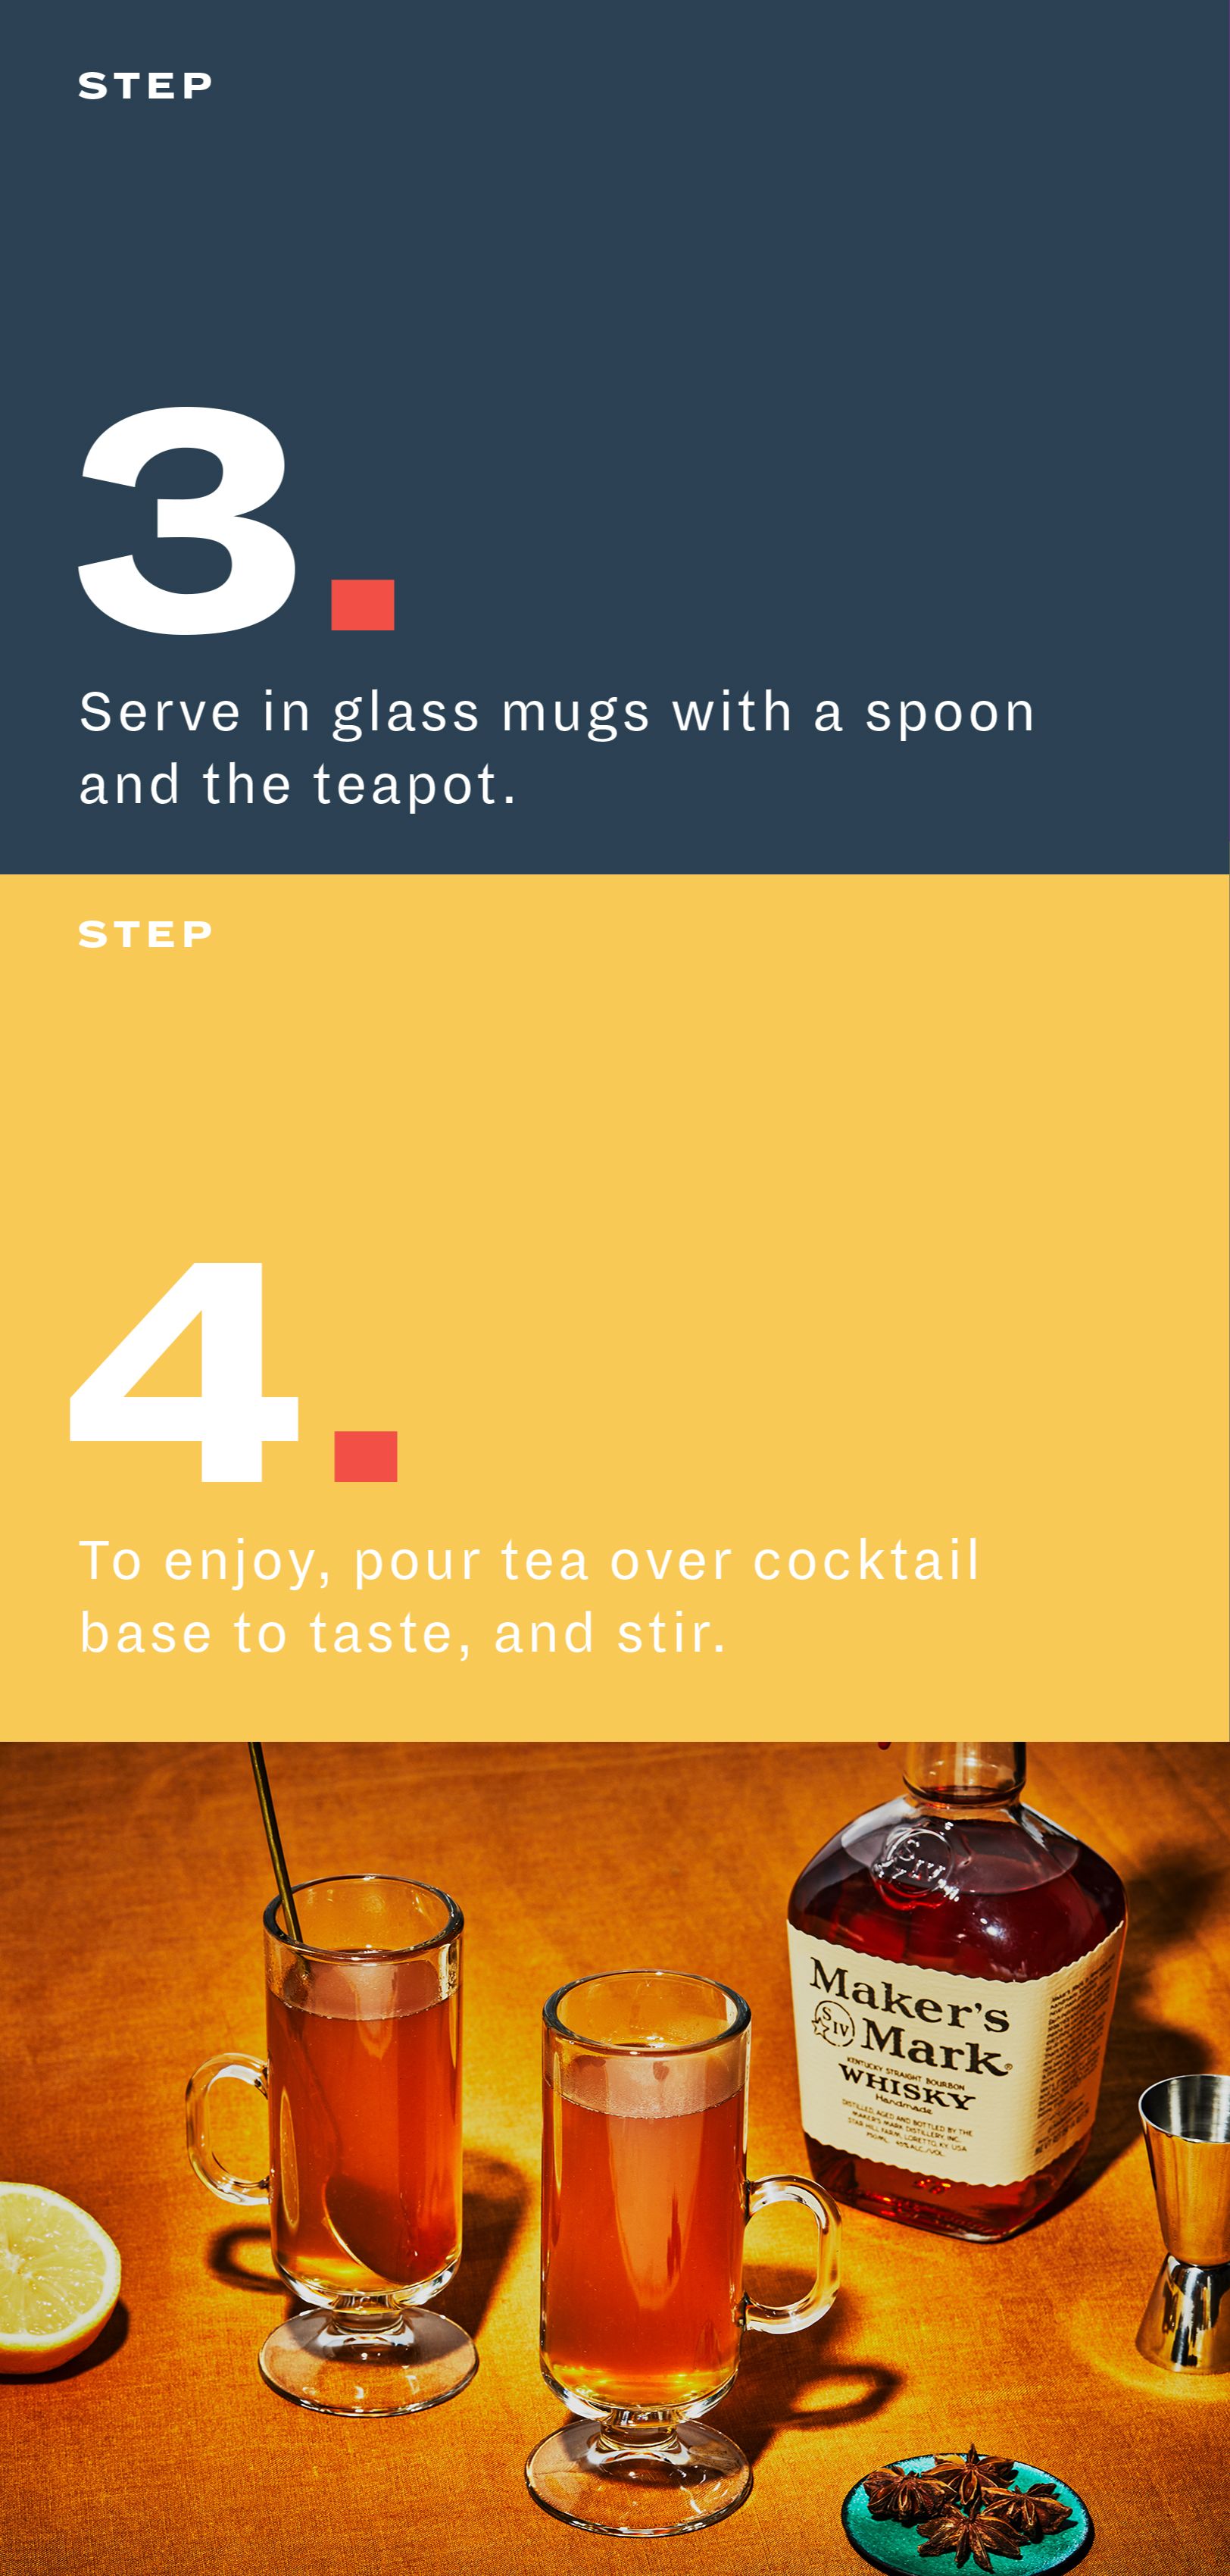 Hack Your Drink: Fast Sachet Infusions for Cocktails